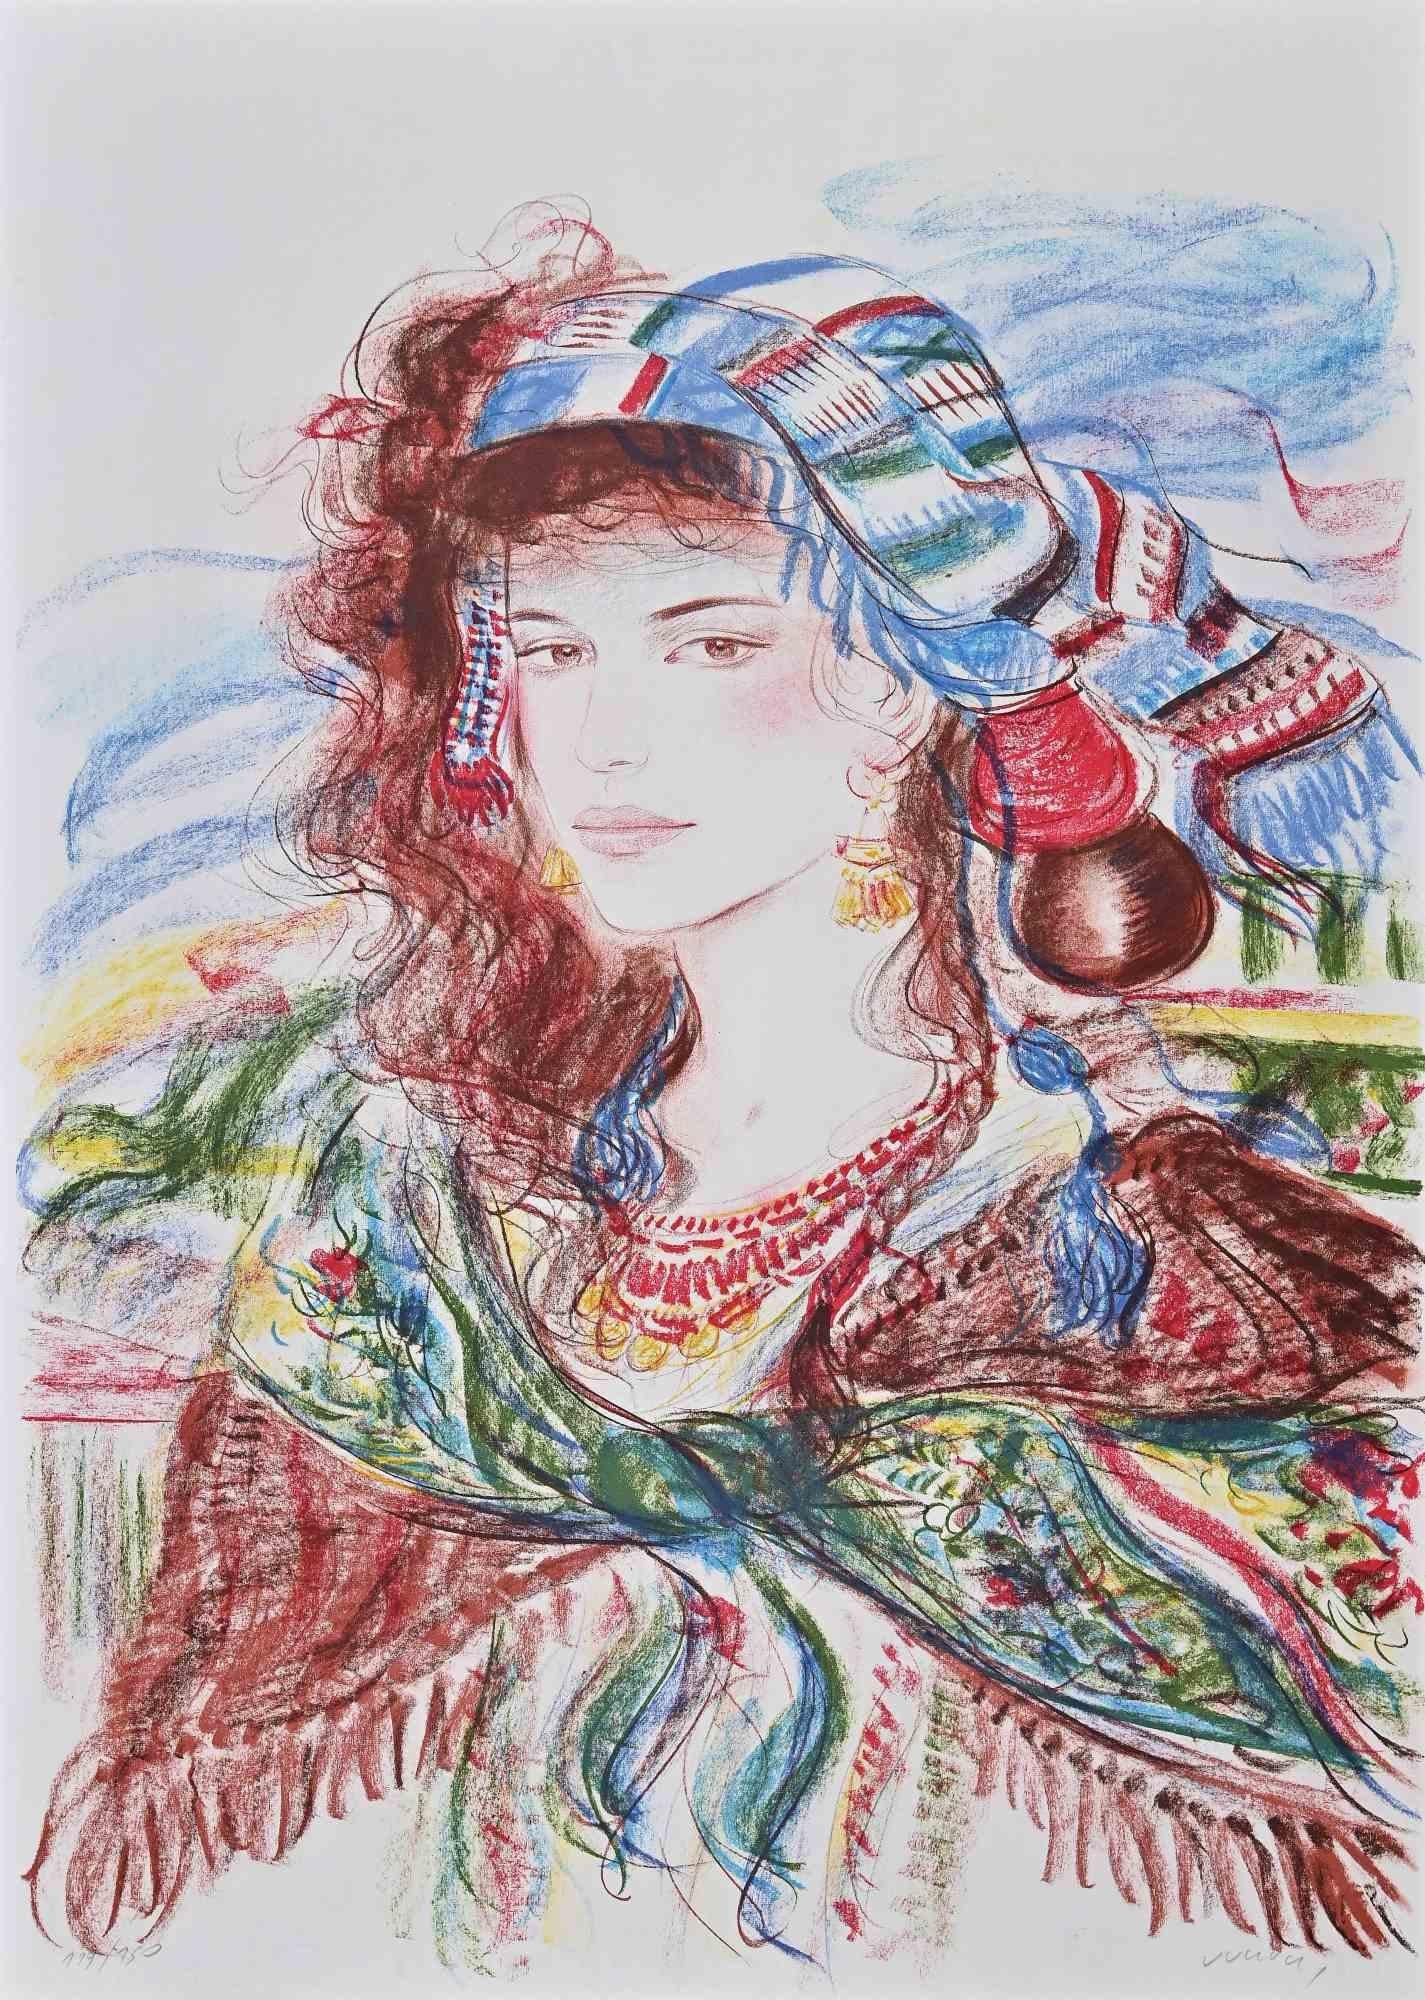 Gypsy - Lithograph by Jovan Vulic - 1980s